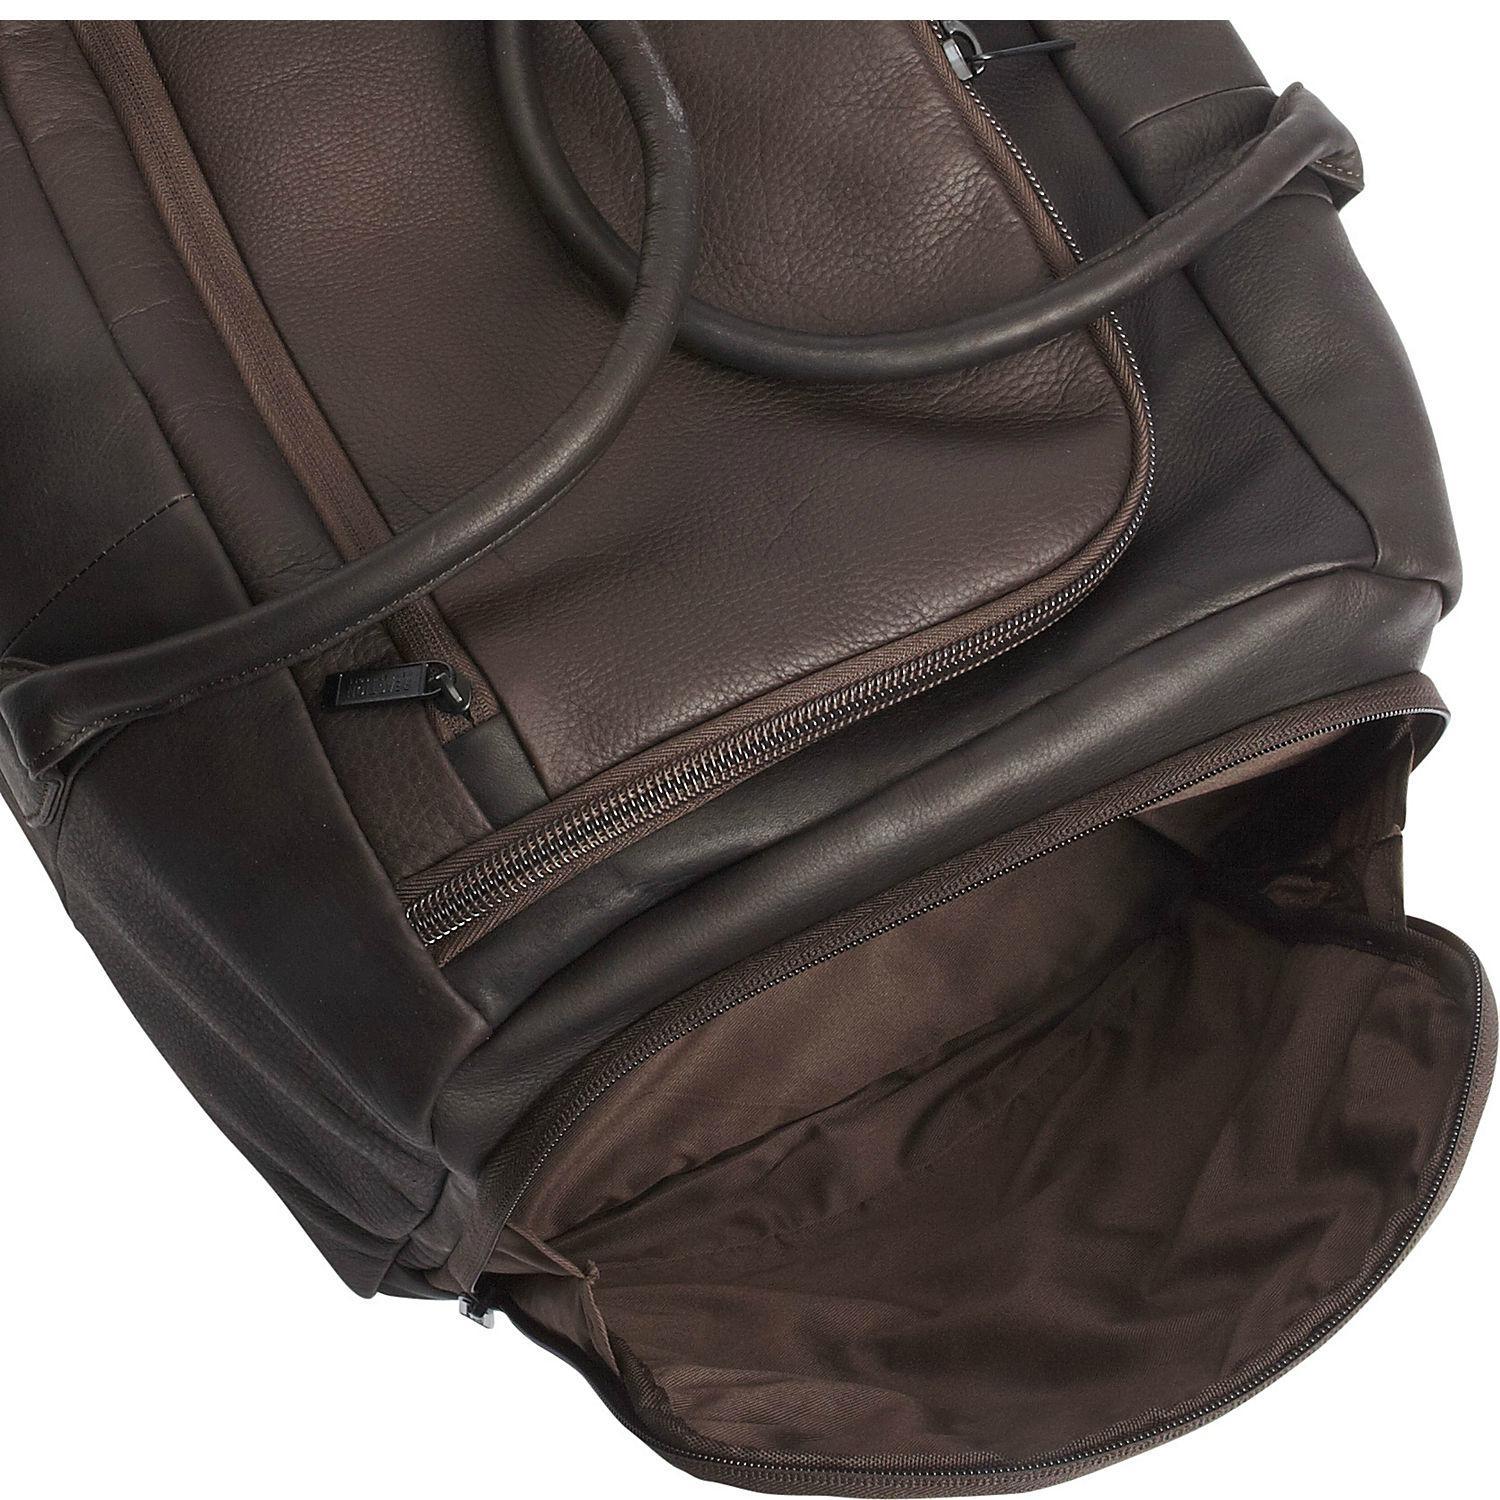 20 Wheeled Duffel Bag in Colombian Leather